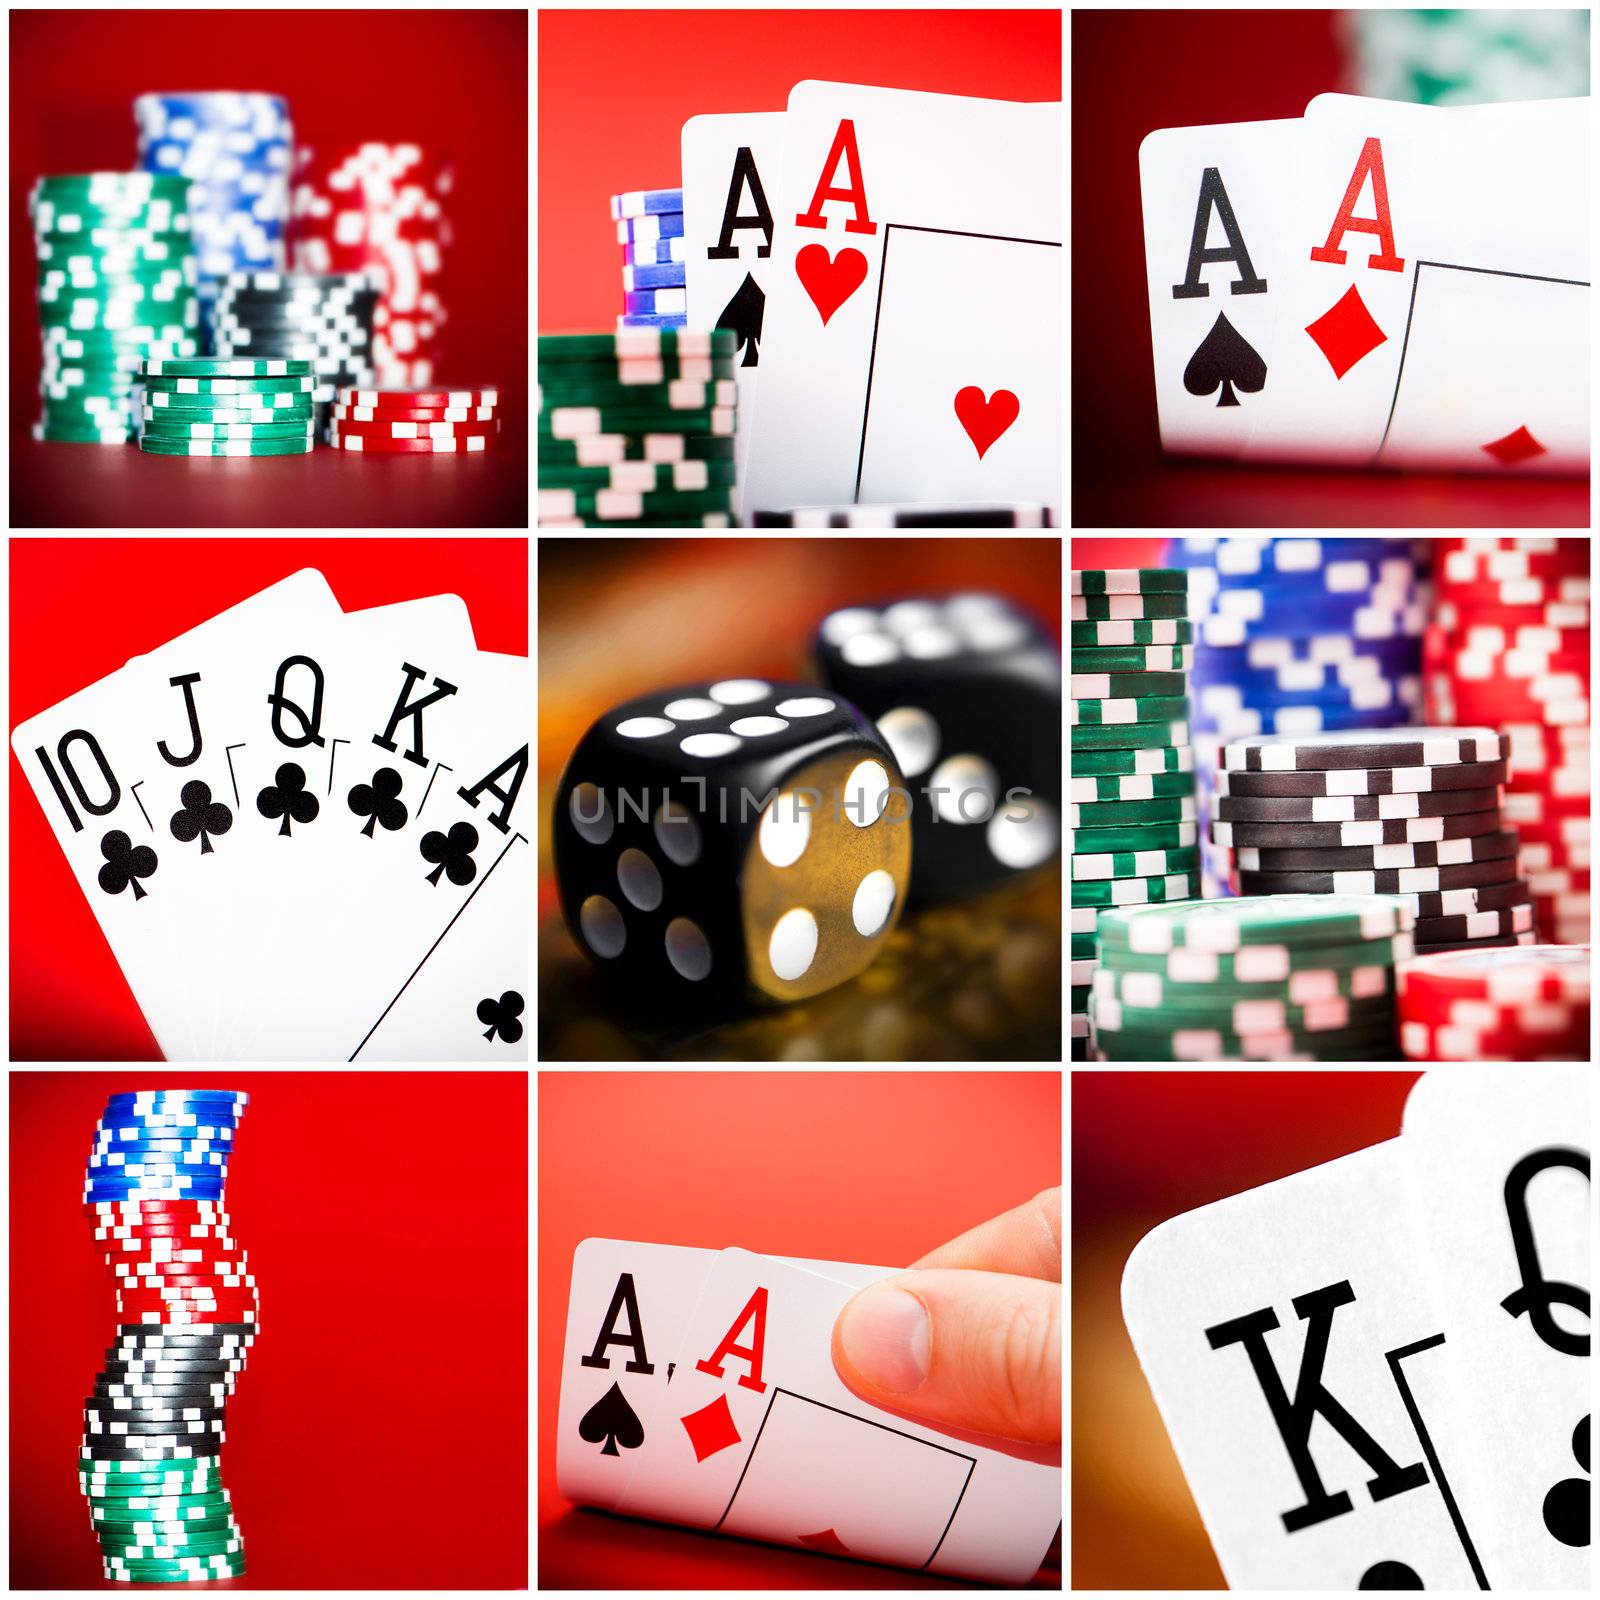 set of different actions and scenes in casino